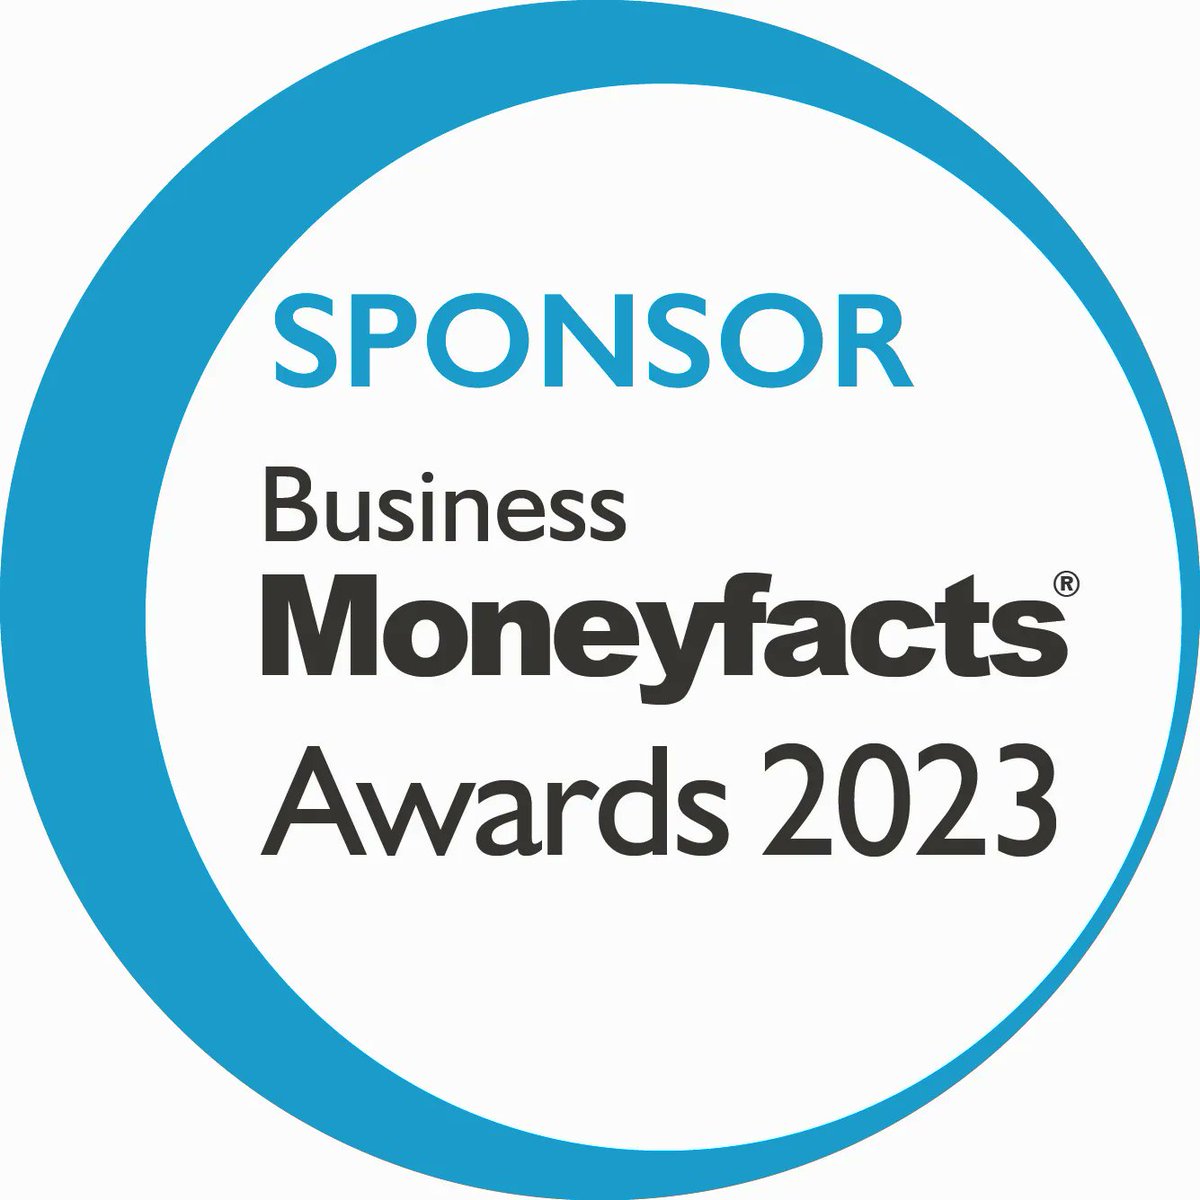 Goodman Corporate are pleased to announce that we are sponsoring 'Best Service from an Invoice Finance Provider' at the 2023 Business MoneyFacts Awards in April. More details will follow in due course. #awards2023 #corporatesponsor #invoicefinance @MoneyfactsGrp